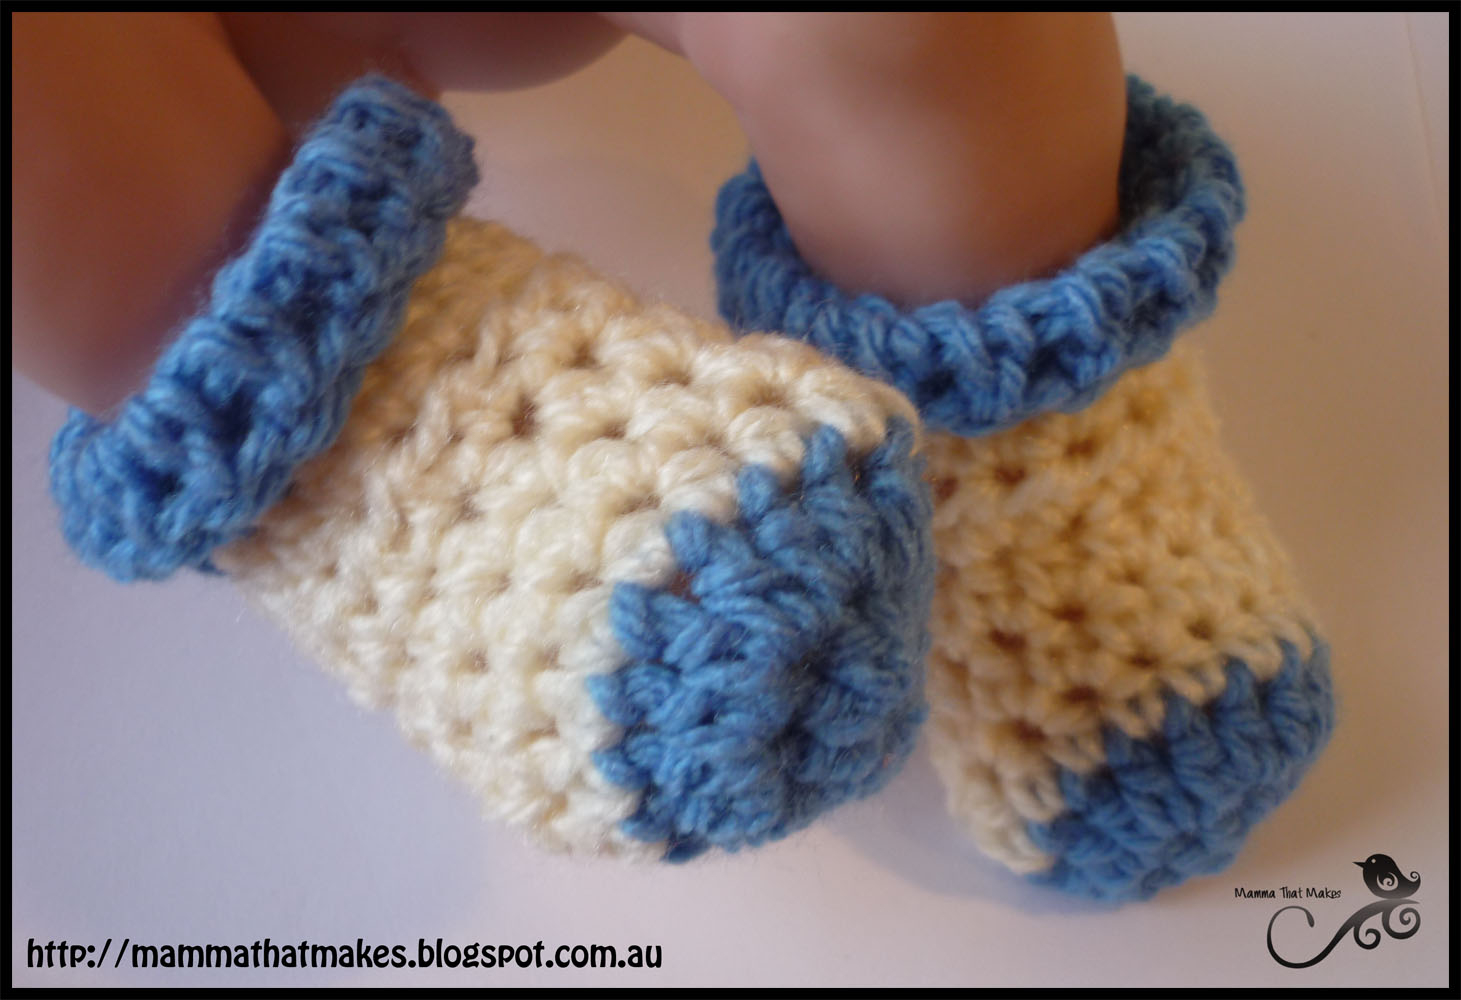 Crochet Patterns For Babies Mamma That Makes Crochet Socks For Preemies And Full Term Babies